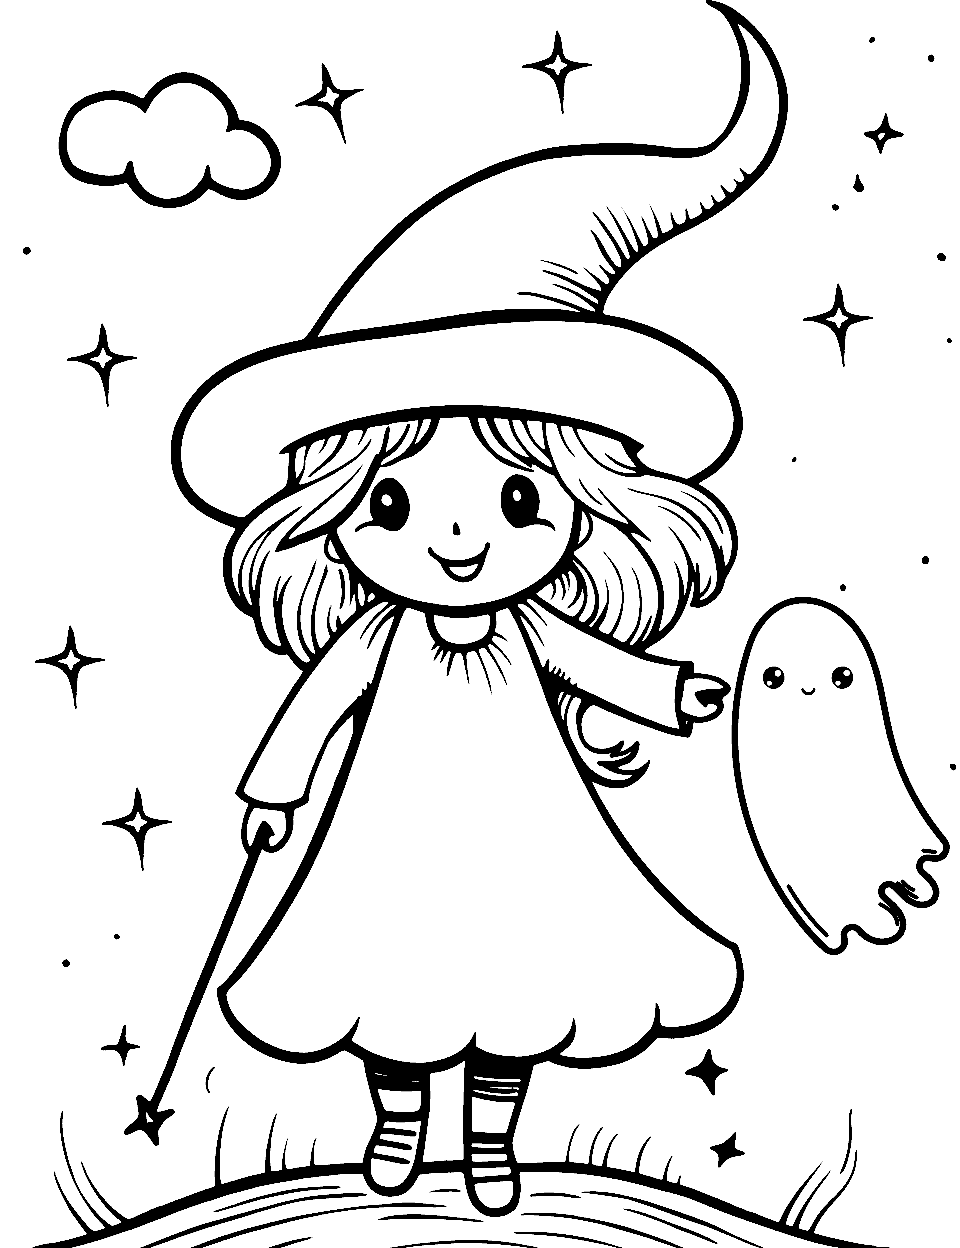 Witch and Ghost Friend Coloring Page - A witch alongside a friendly ghost in a starry sky.